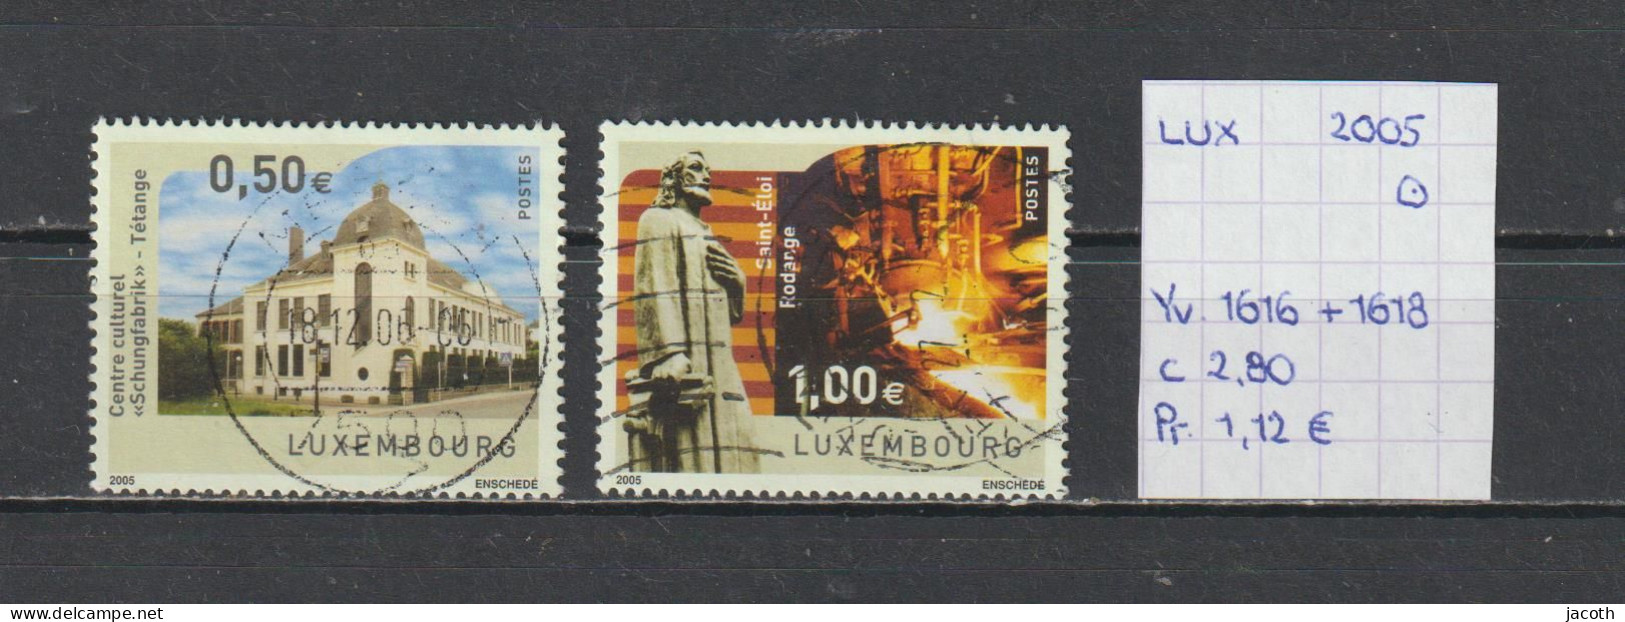 (TJ) Luxembourg 2005 - YT 1616 + 1618 (gest./obl./used) - Used Stamps